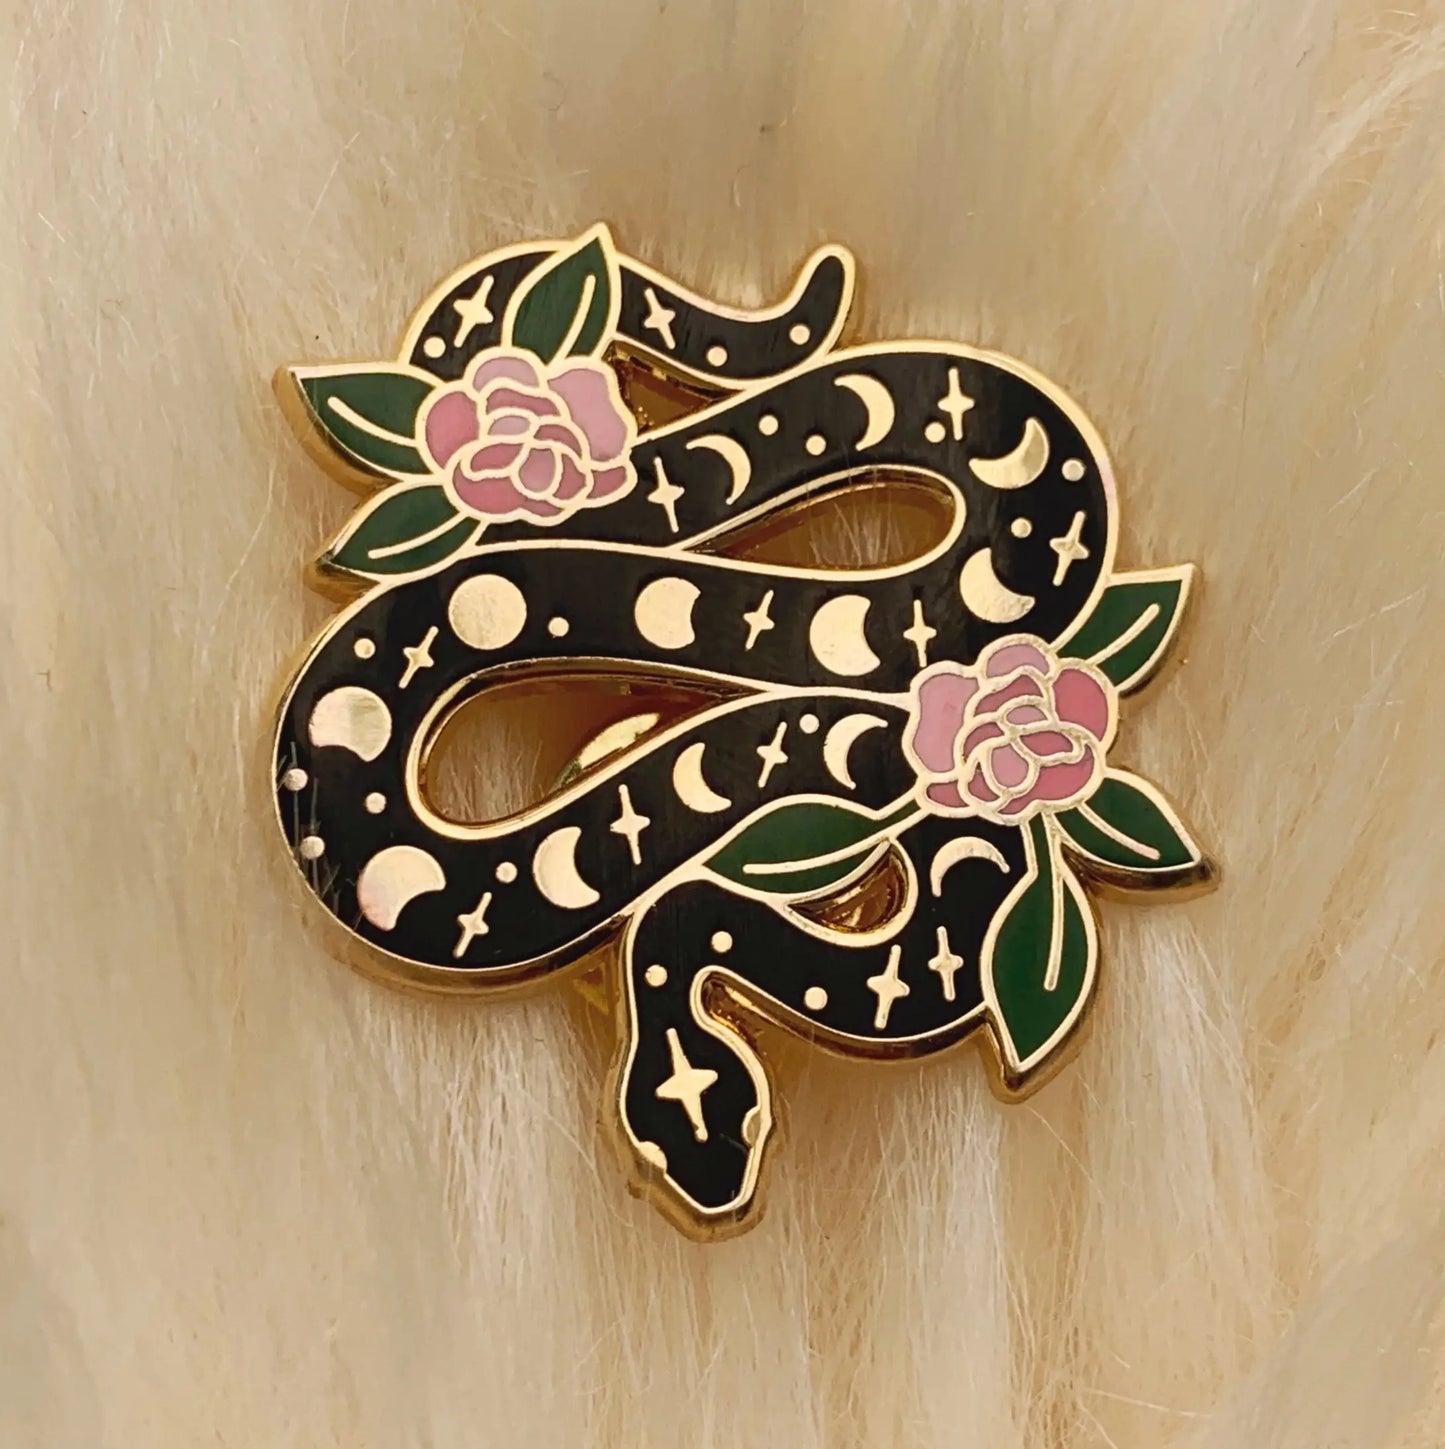 This magical snake enamel pin is intricately detailed with the moon phases & gorgeous pink flowers winding it's way through the serpent. 